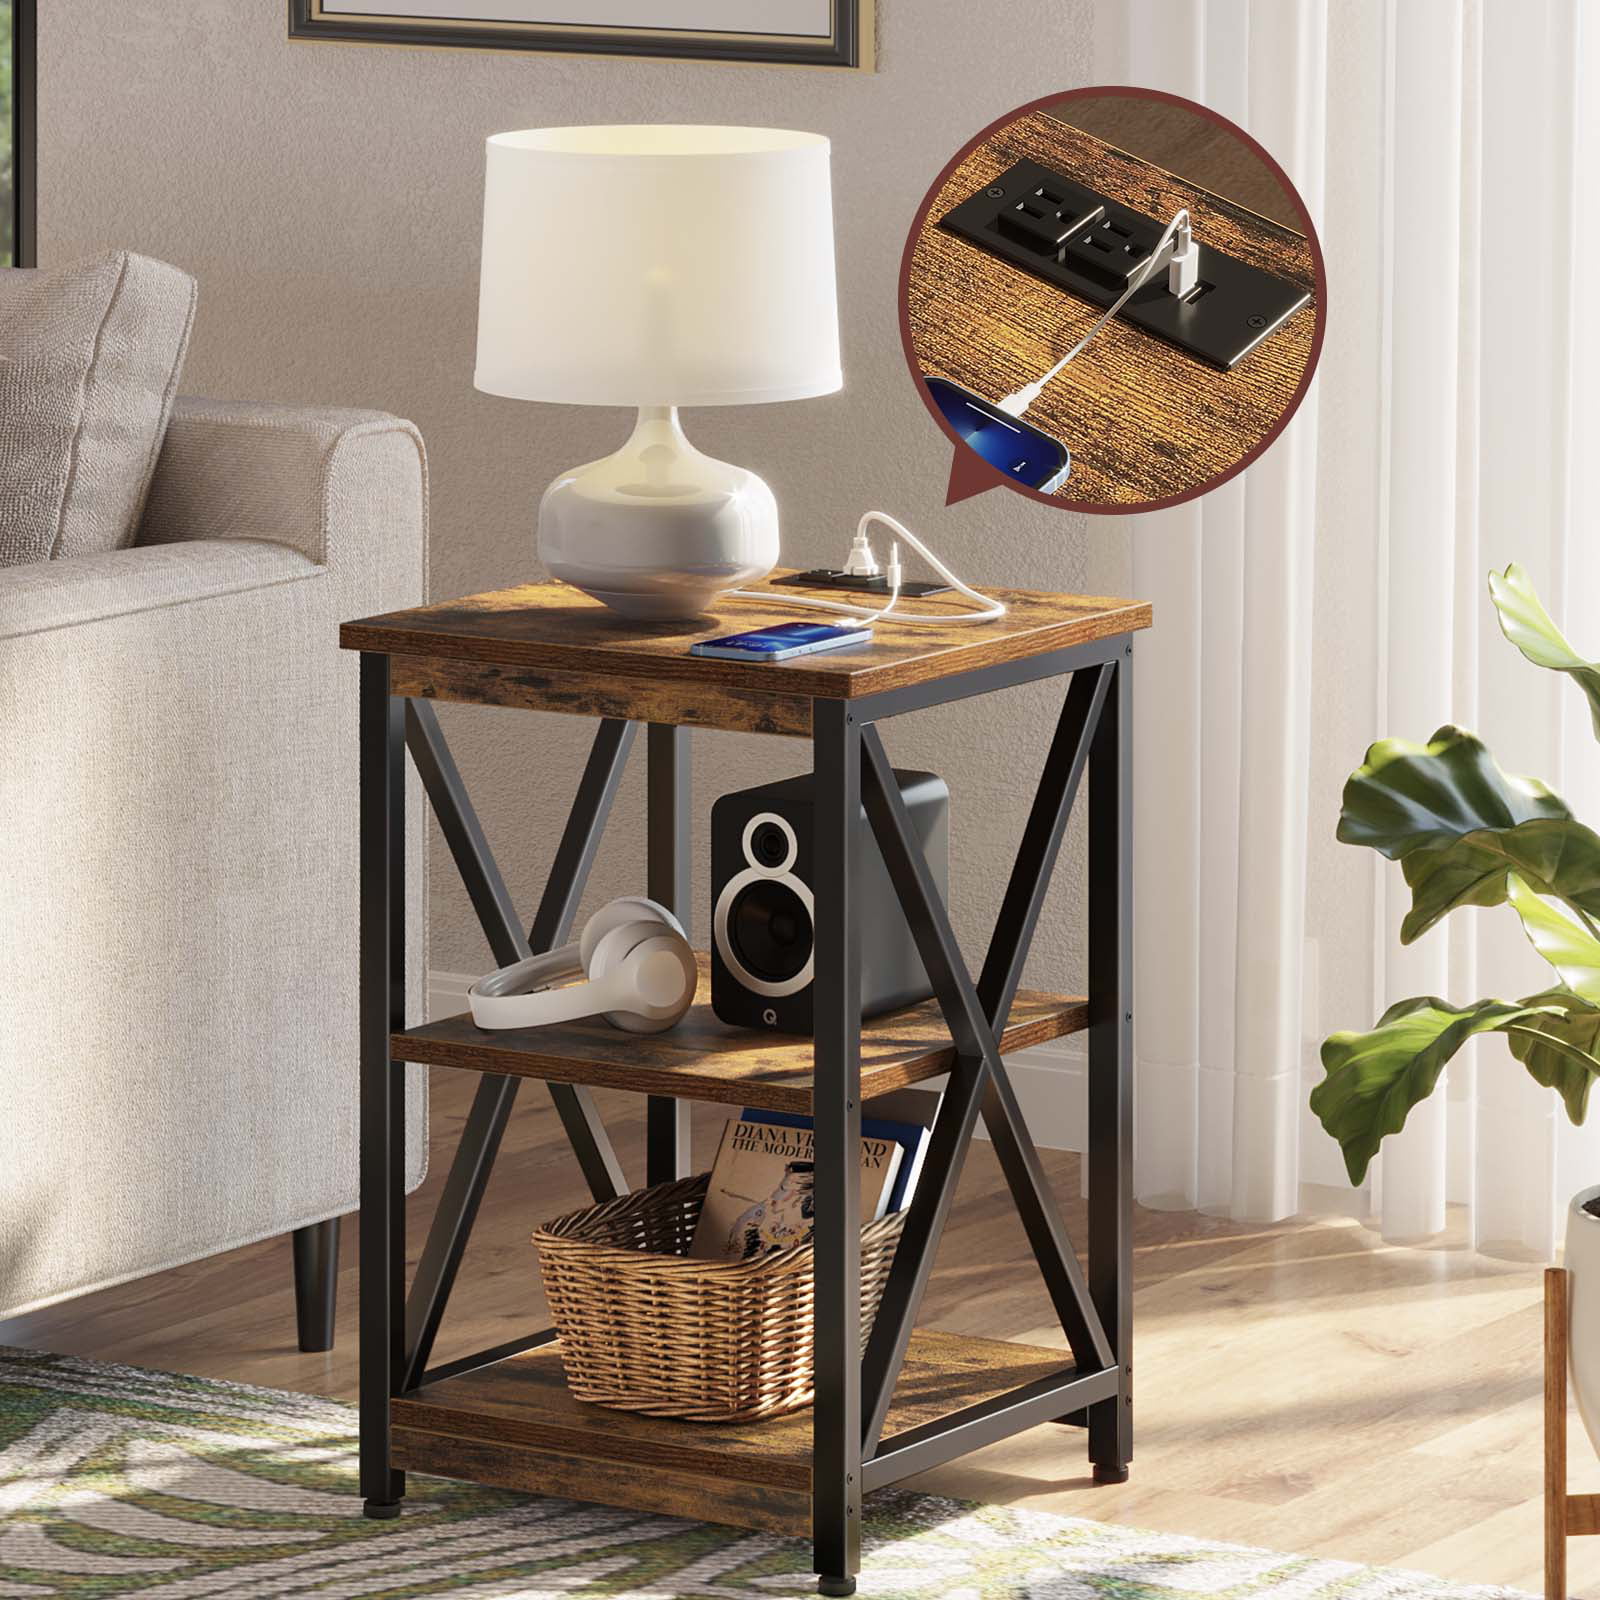 Rolanstar Narrow End Table with Wooden Drawers and USB Ports & Power O